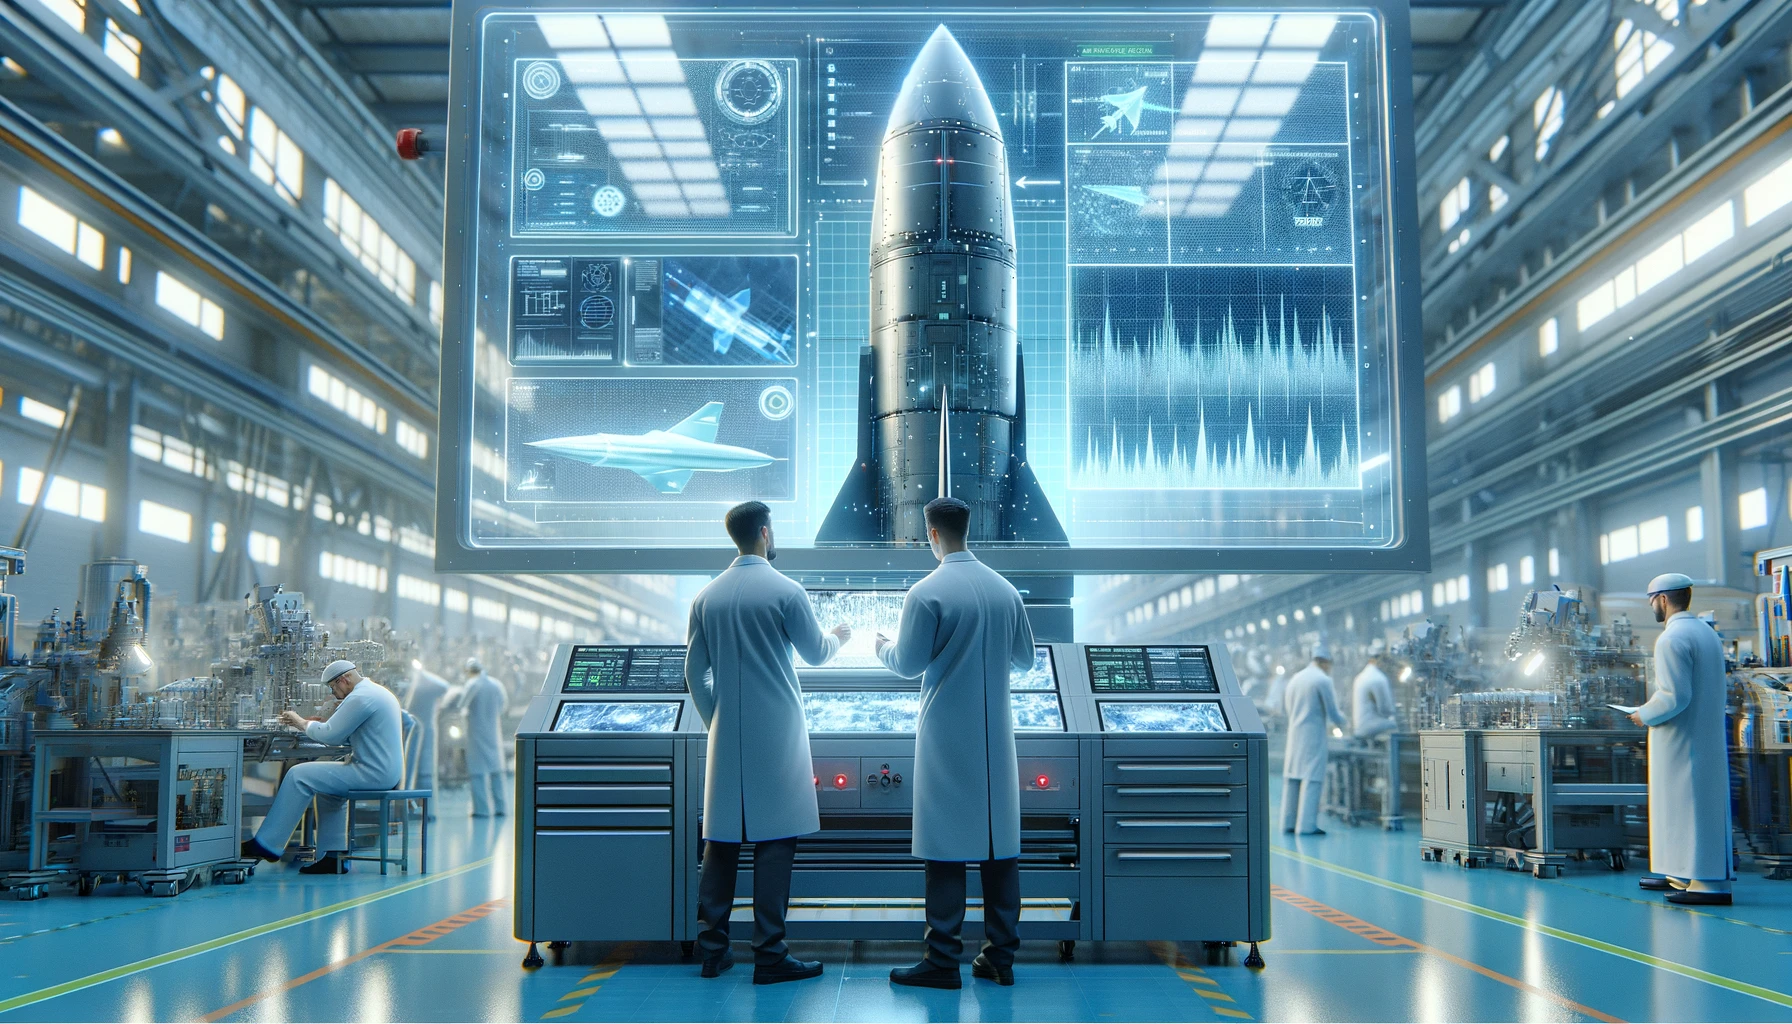 The scene is set in a high-tech manufacturing facility, where engineers are depicted using a system that combines deep learning and 3D imaging. They are closely analyzing critical missile components on large digital displays, which highlight defects and measurements.